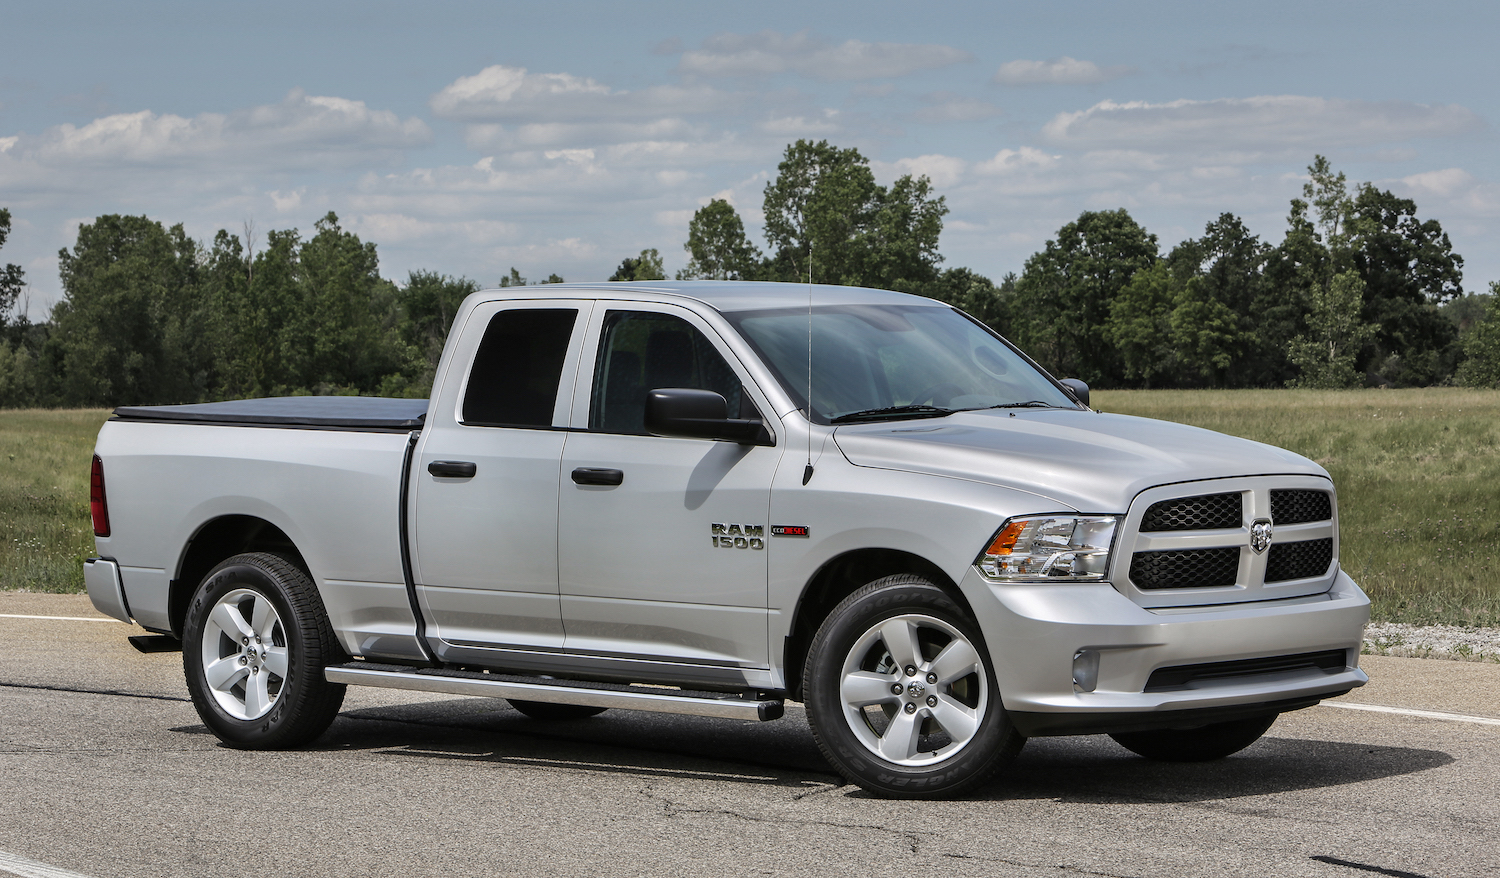 Promo photo of a silver 2018 Ram truck parked on a street in front of a row of trees.